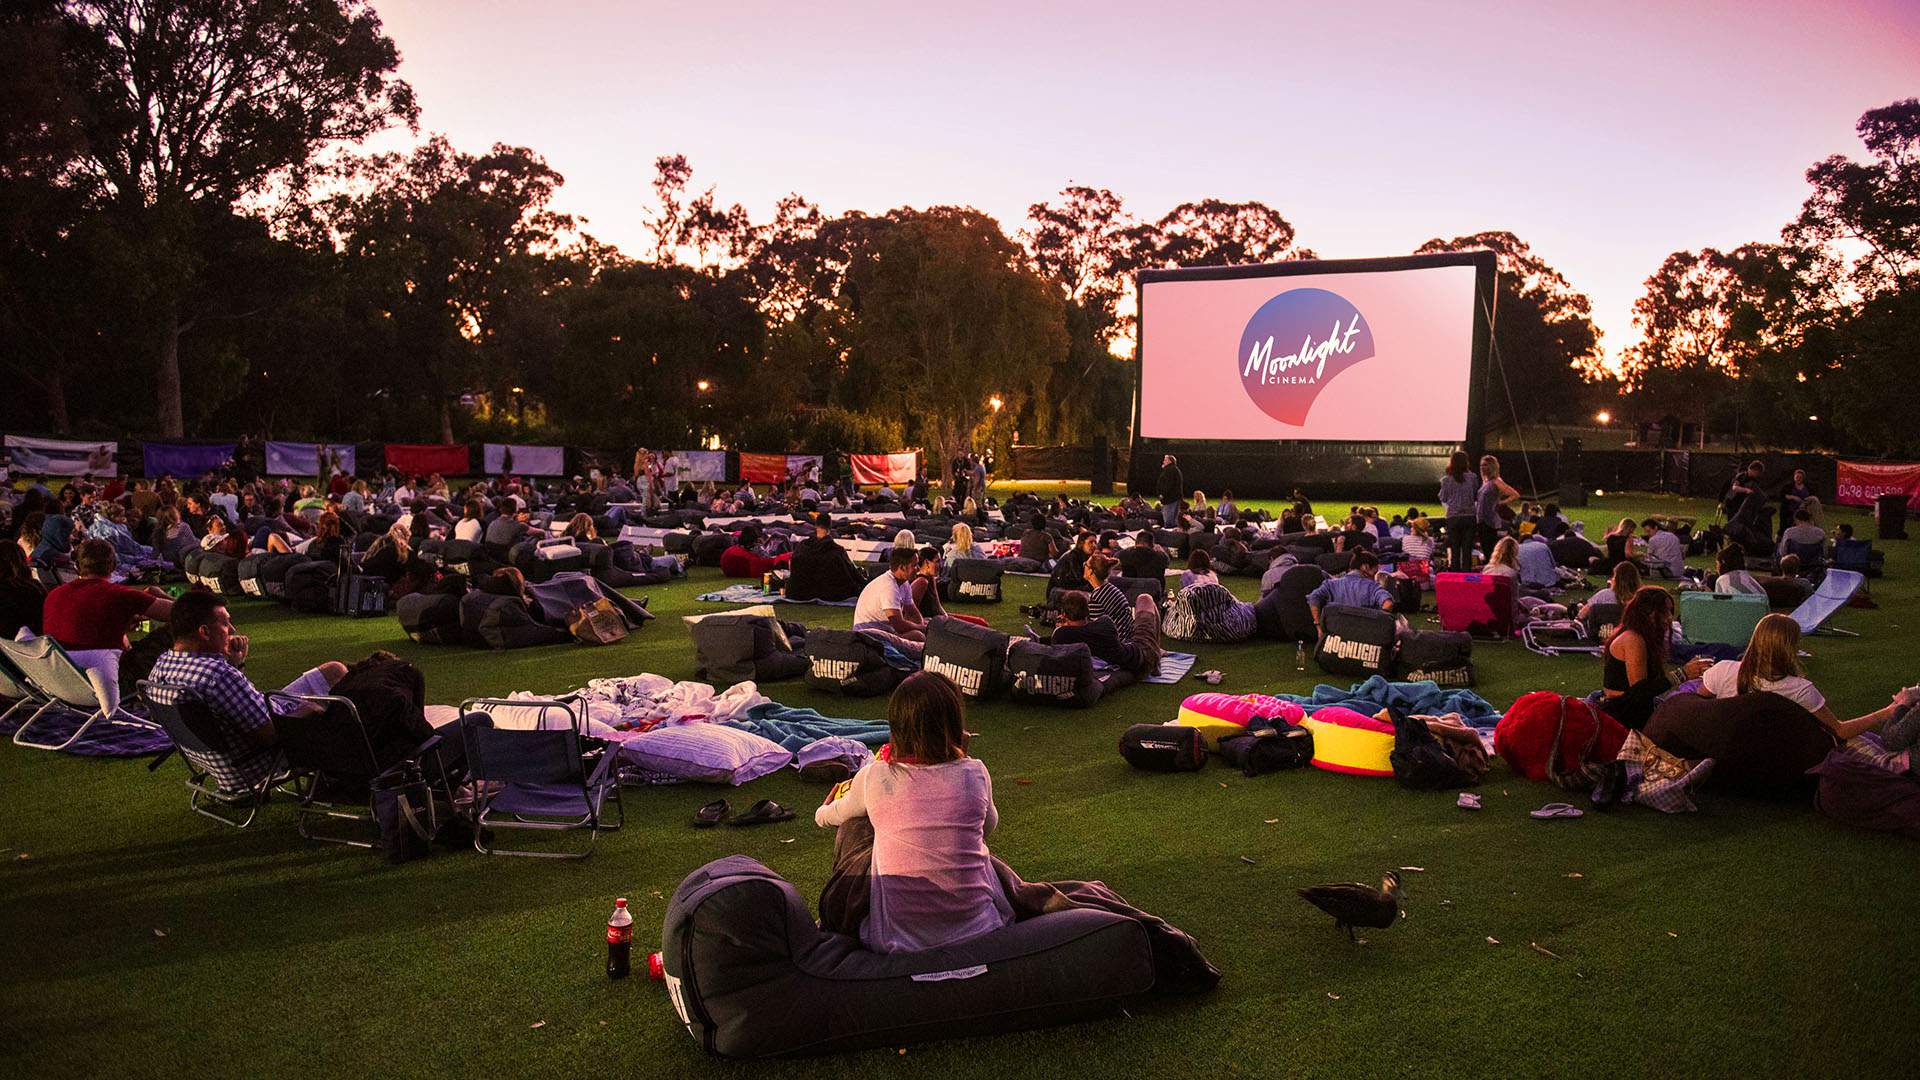 Moonlight Cinema Has Released Its January Lineup So You Can Start 2023 with Movies Under the Stars